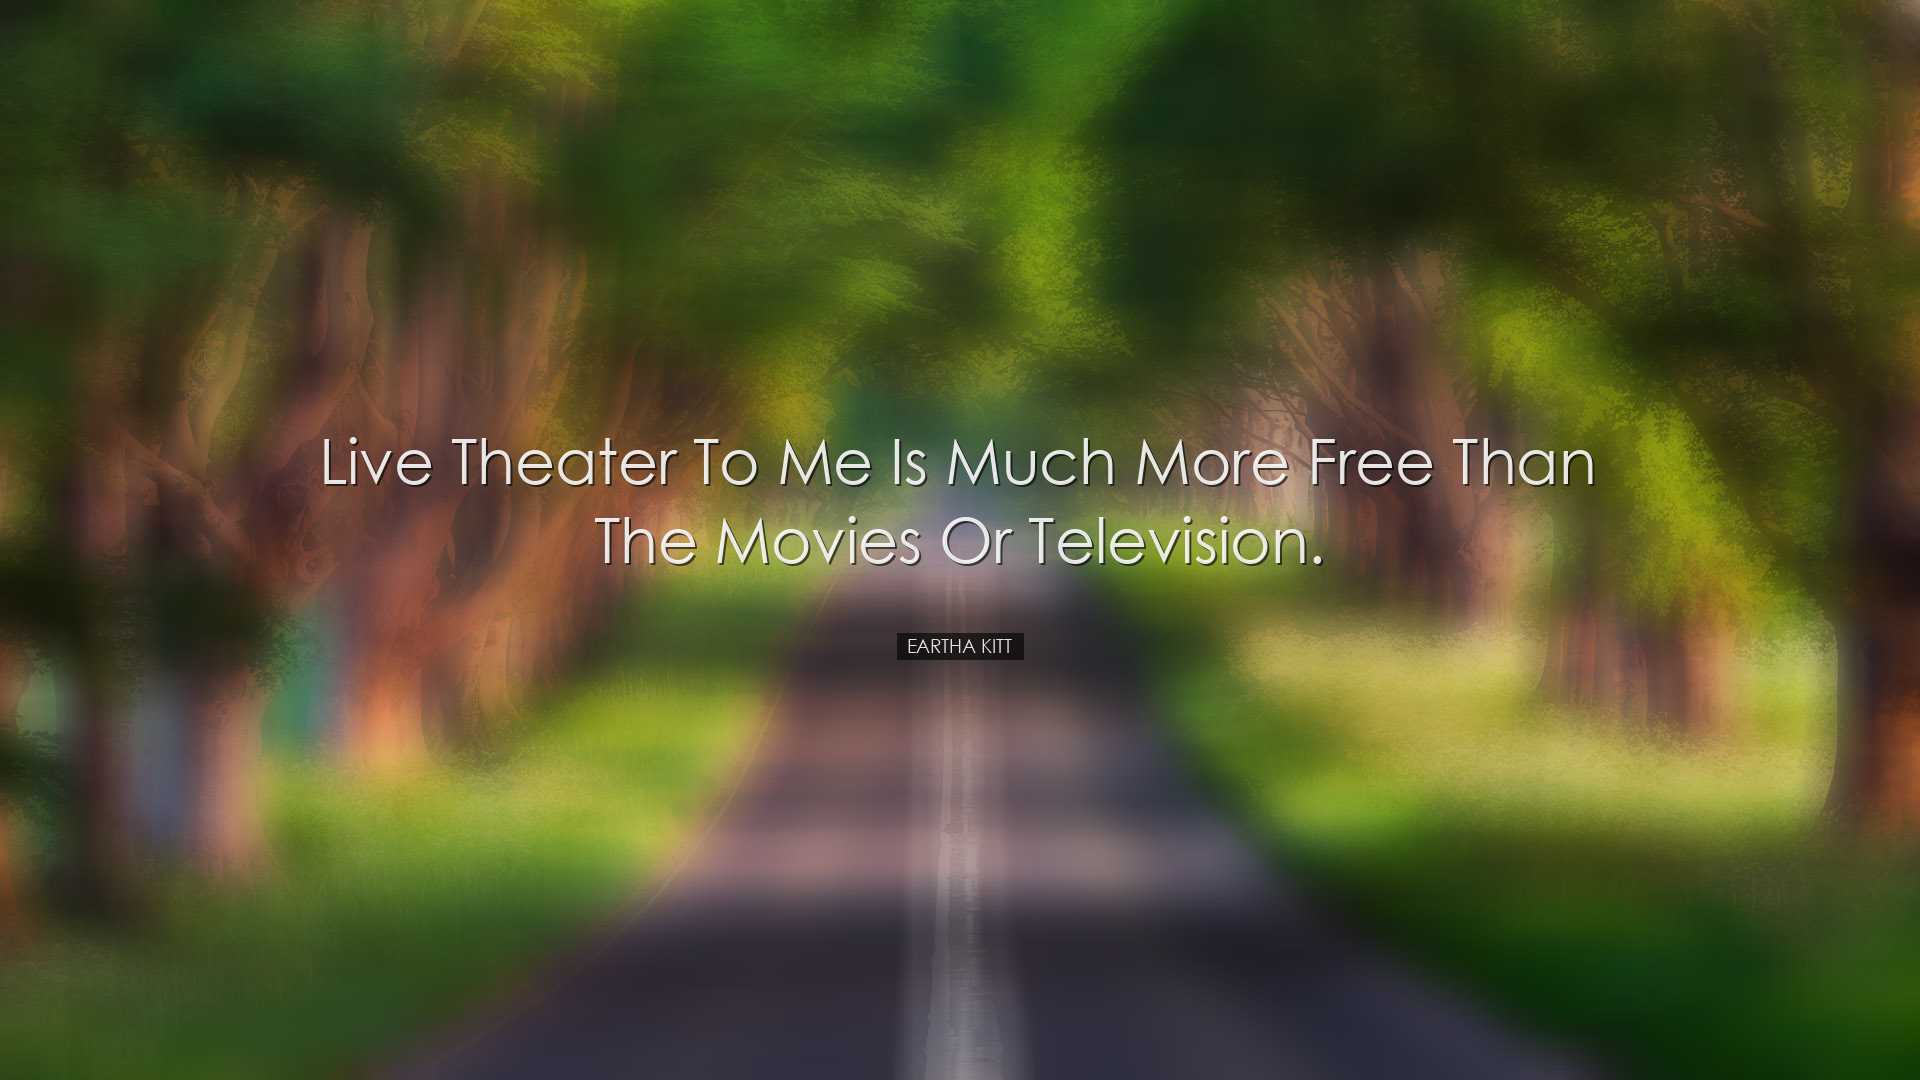 Live theater to me is much more free than the movies or television